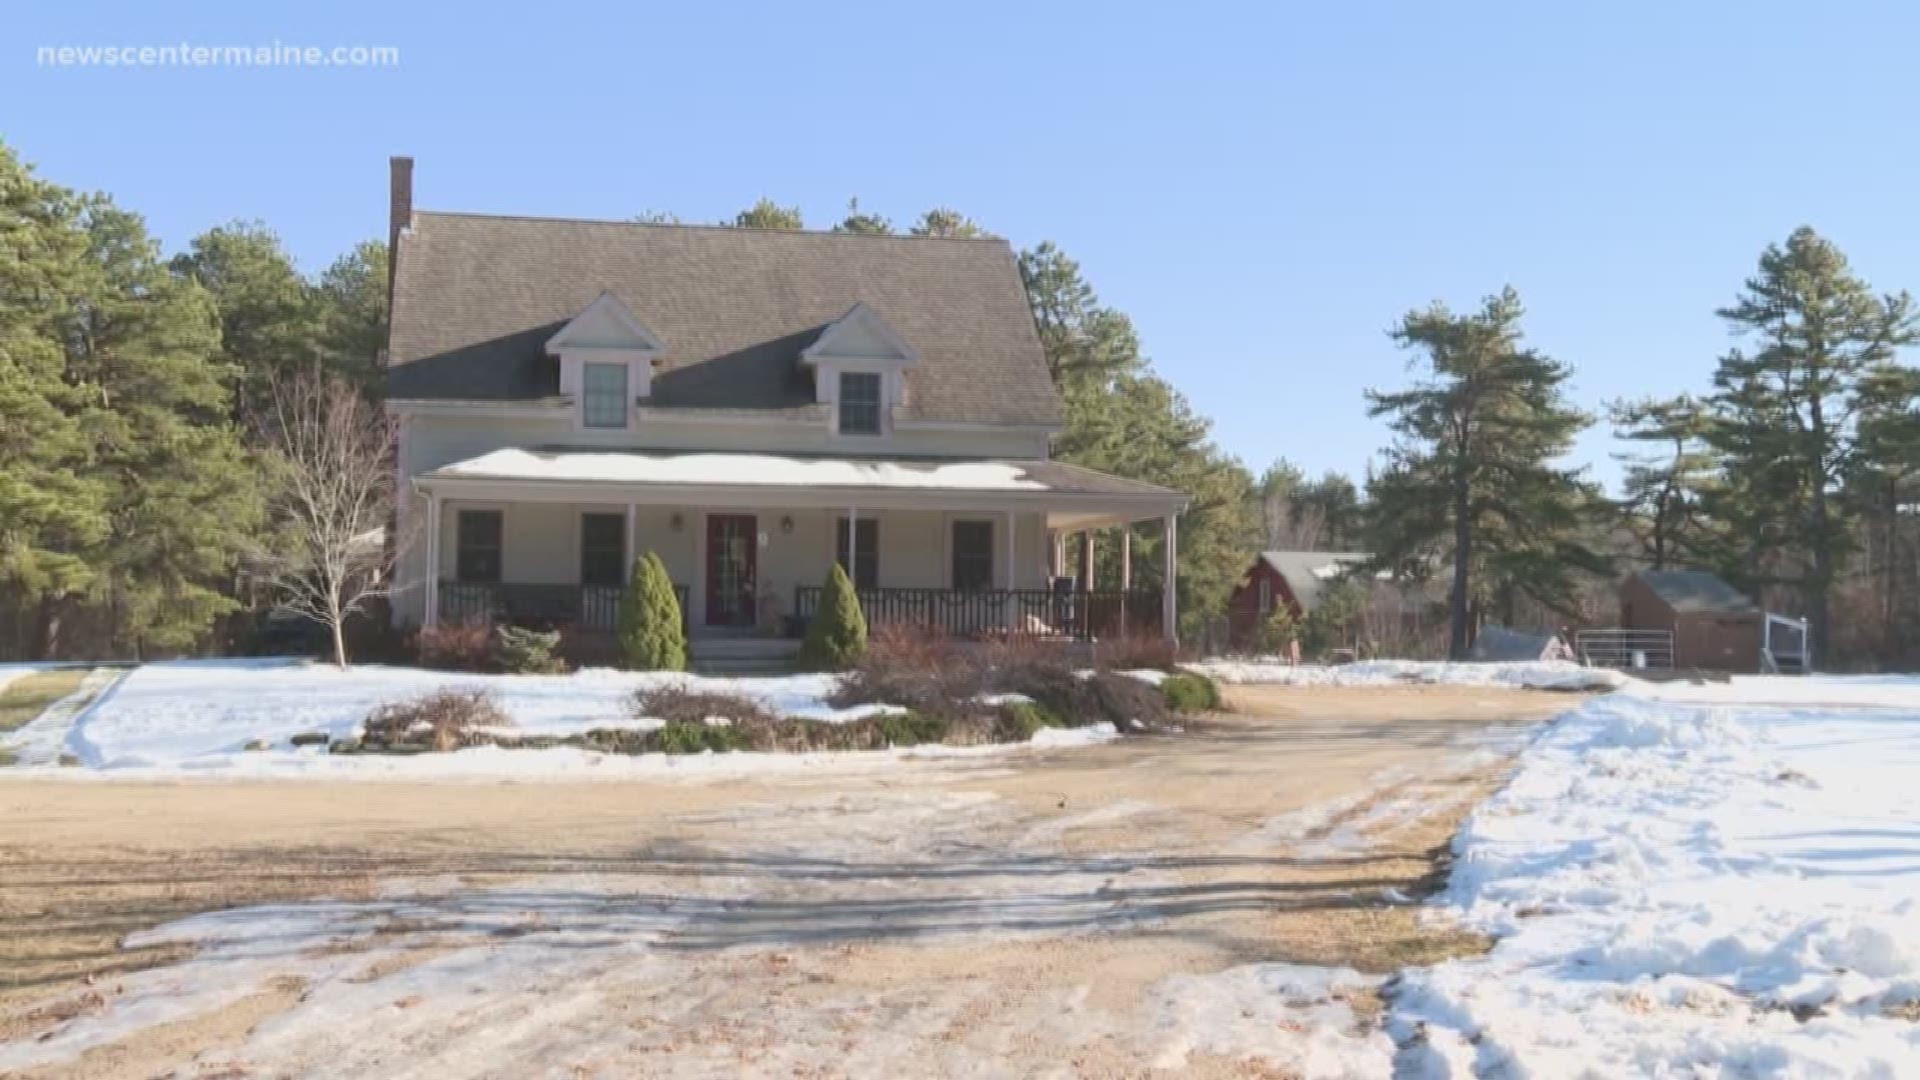 Kennebunk home unknowingly listed on Airbnb